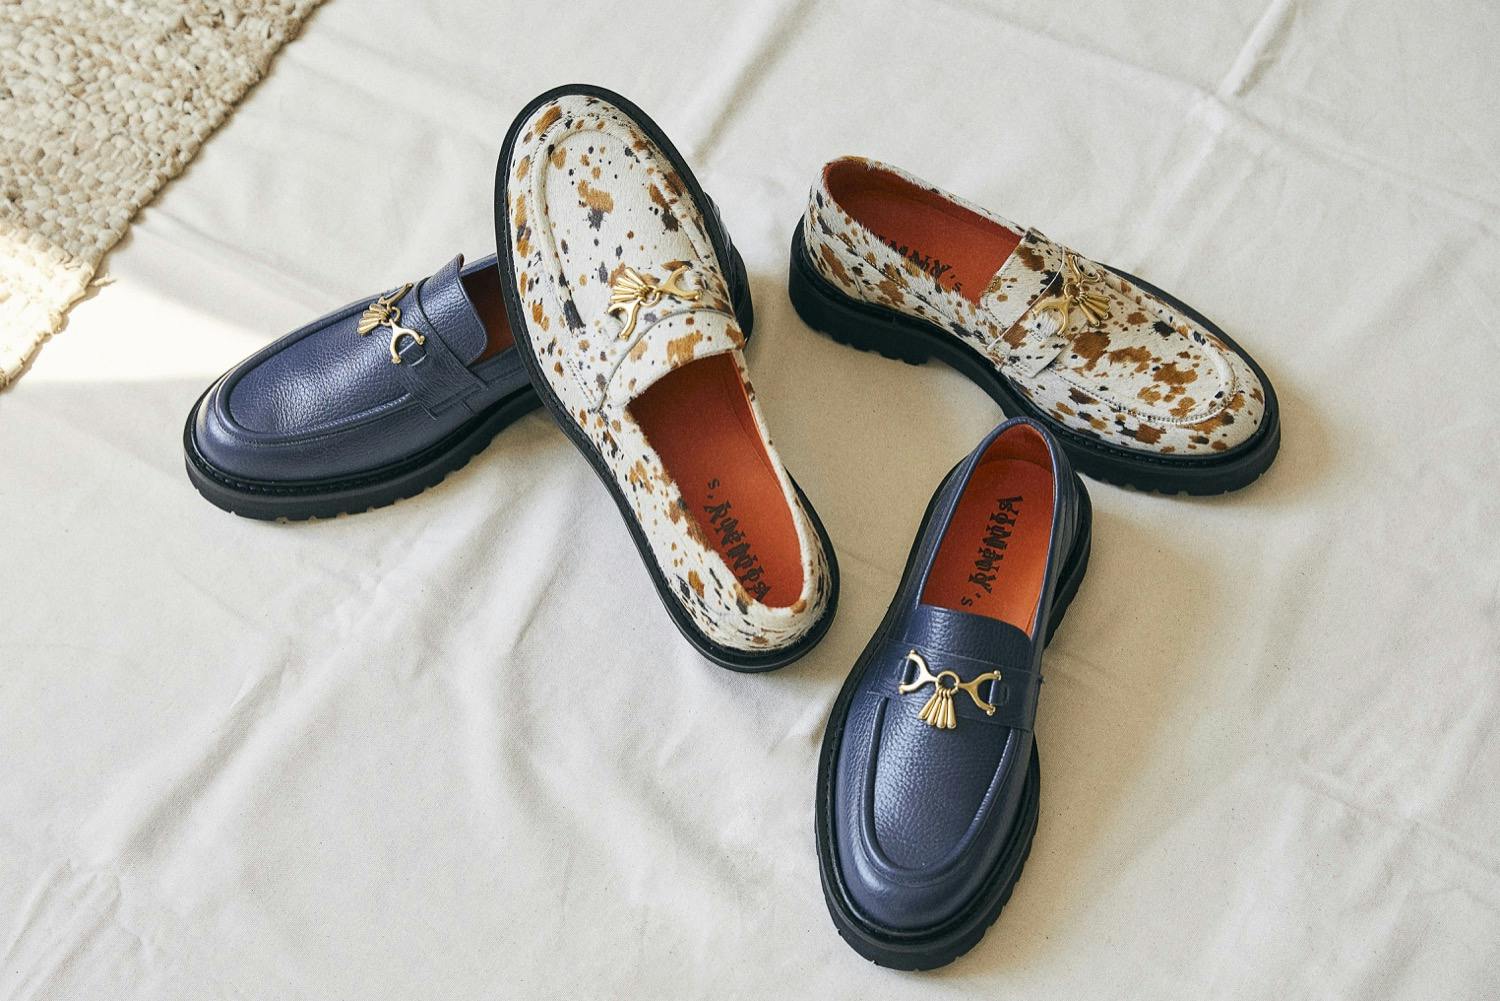 Vinny's & Soulland's Loafers a Sophisticated | END.